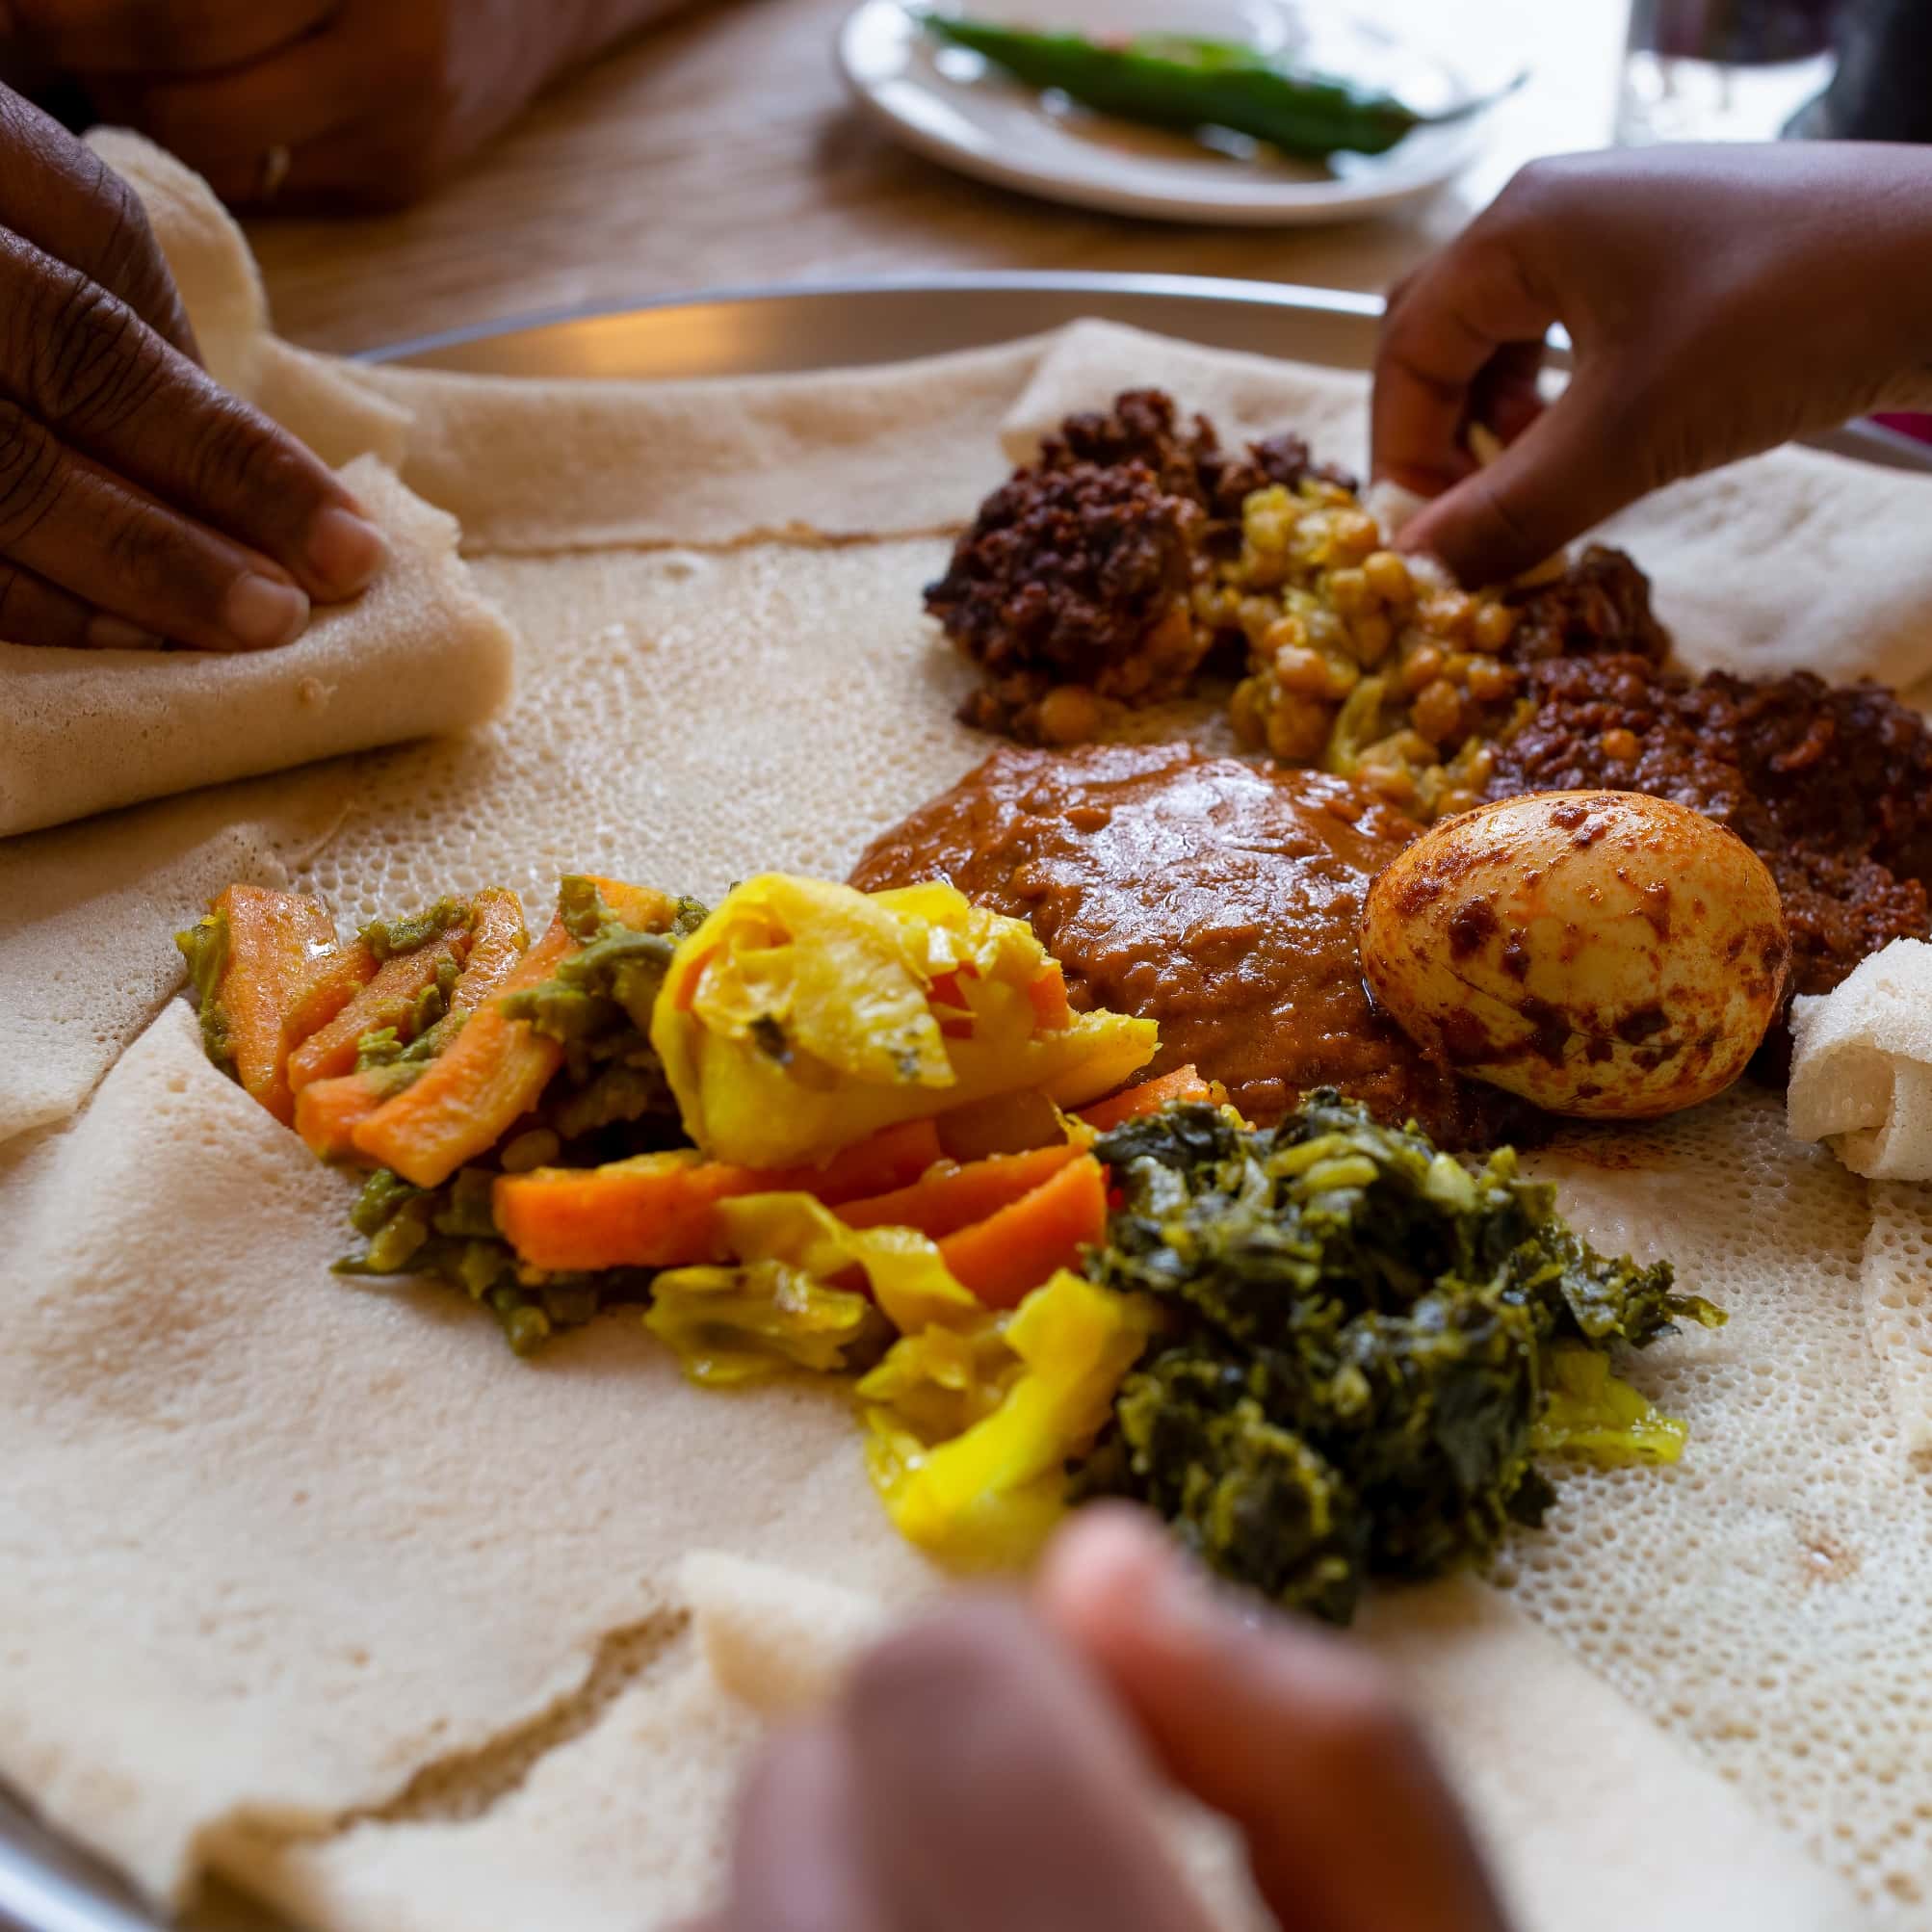 Sharing an Ethiopian Meal